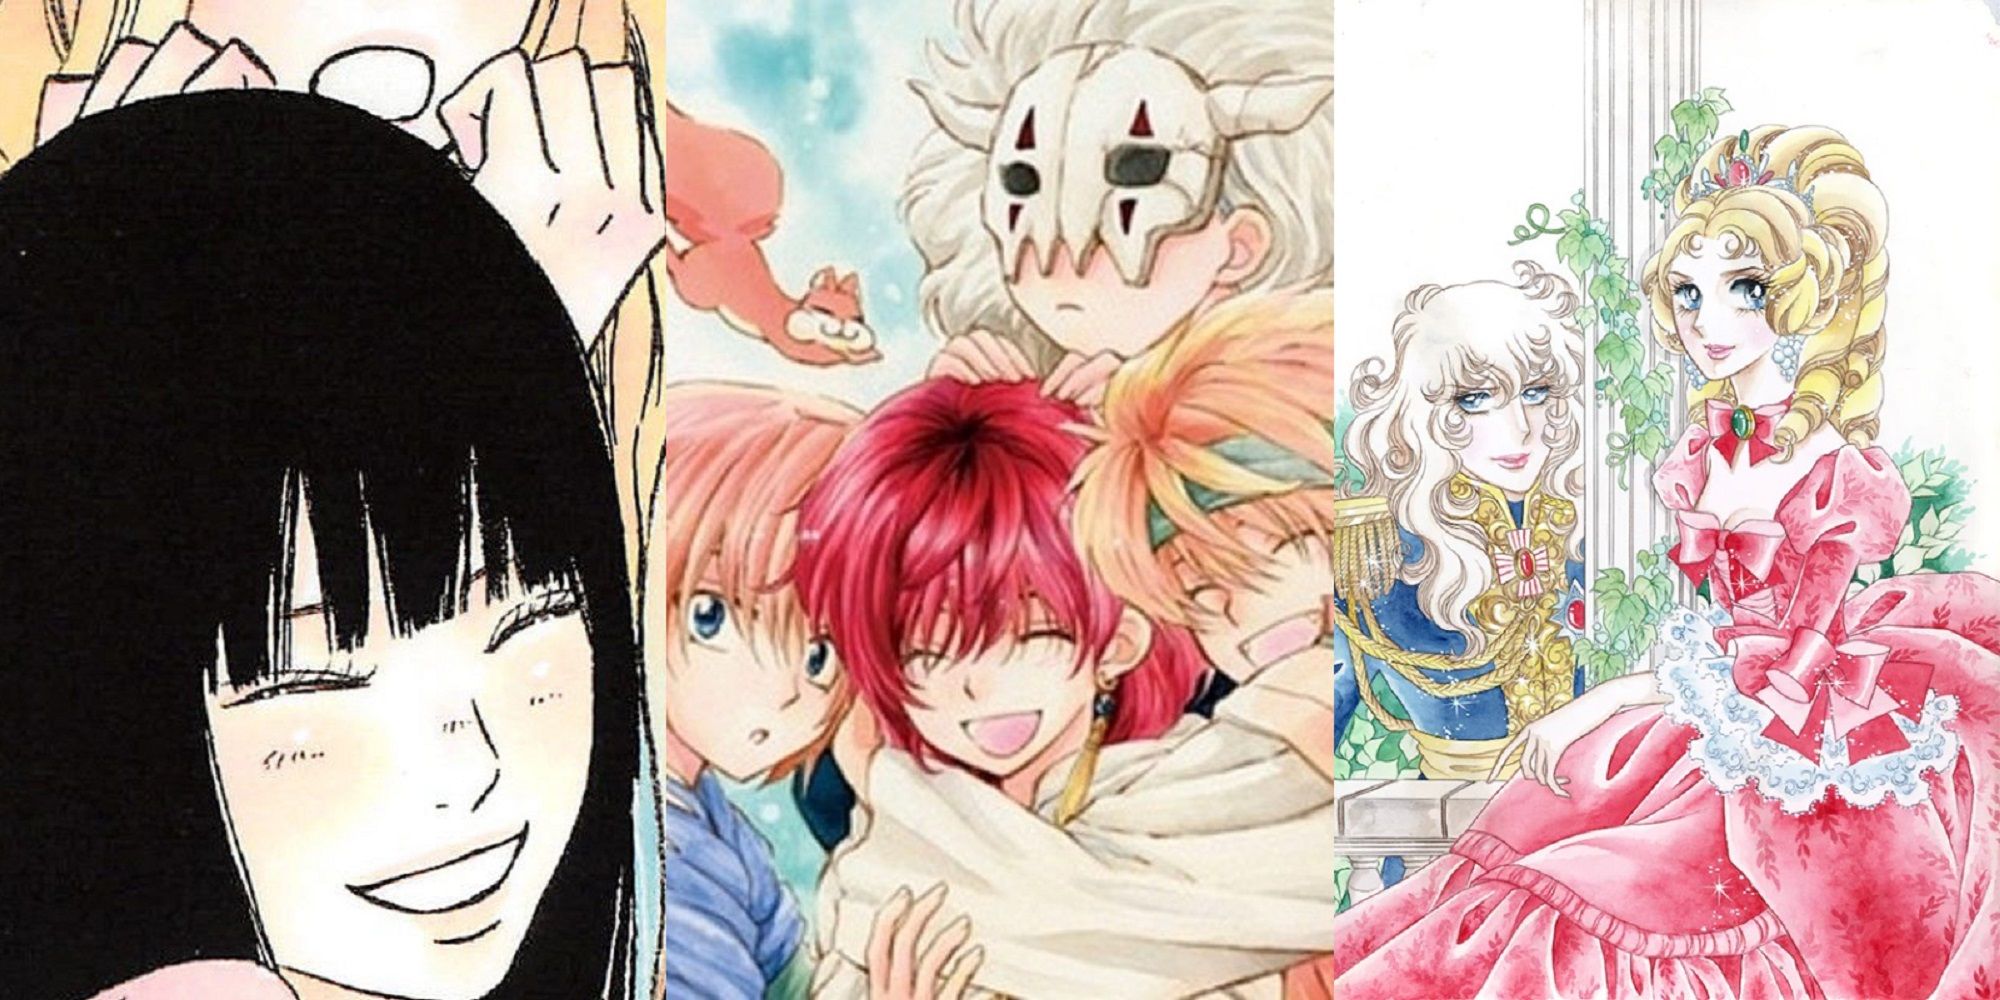 Split image of official artwork from Kimi ni Todoke, Yona of the Dawn, and The Rose of Versailles